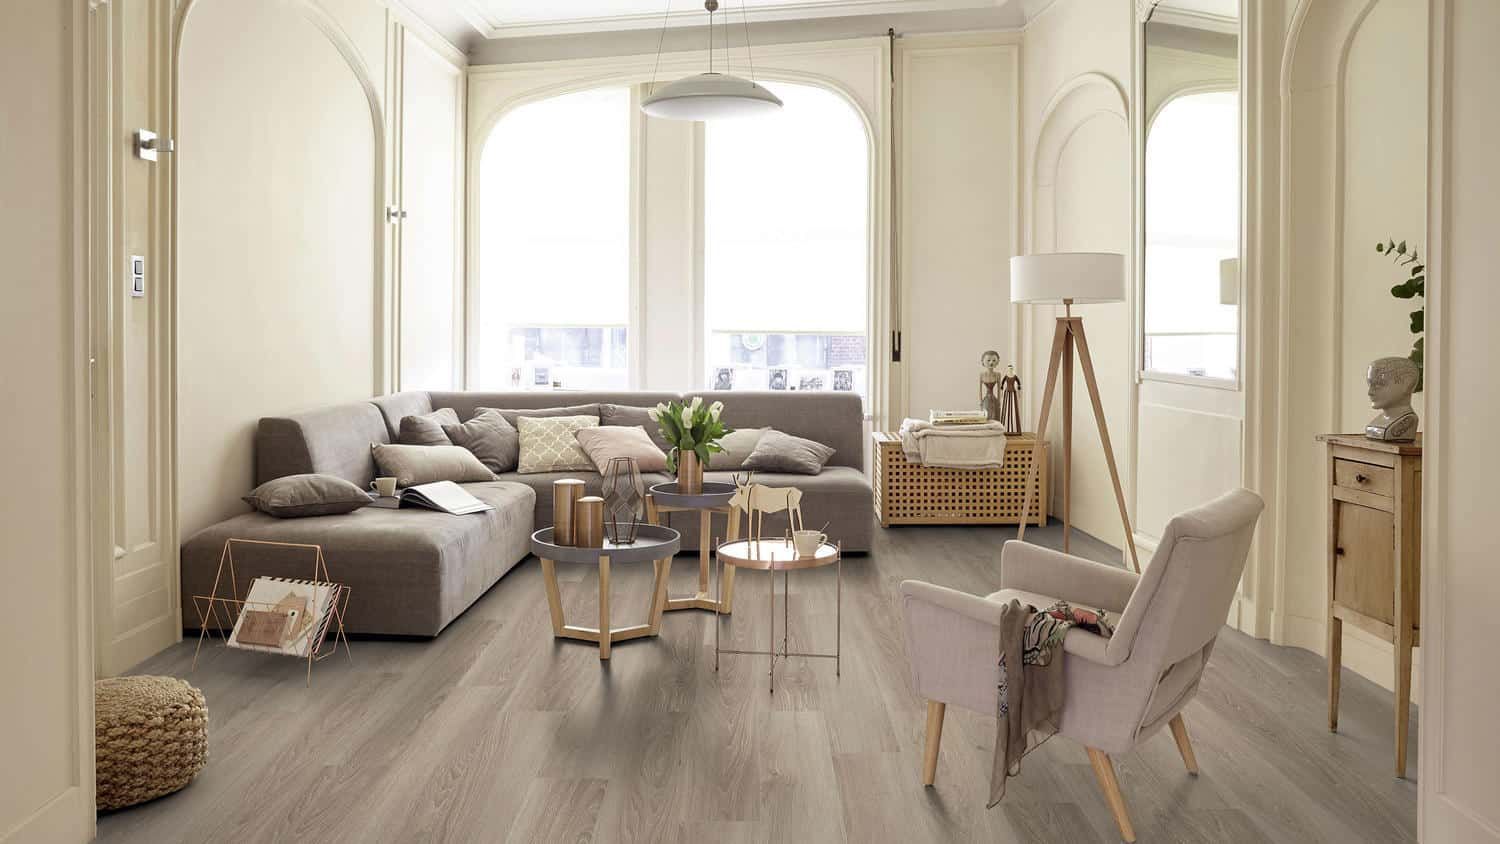 What Are the Most Durable Flooring Options?